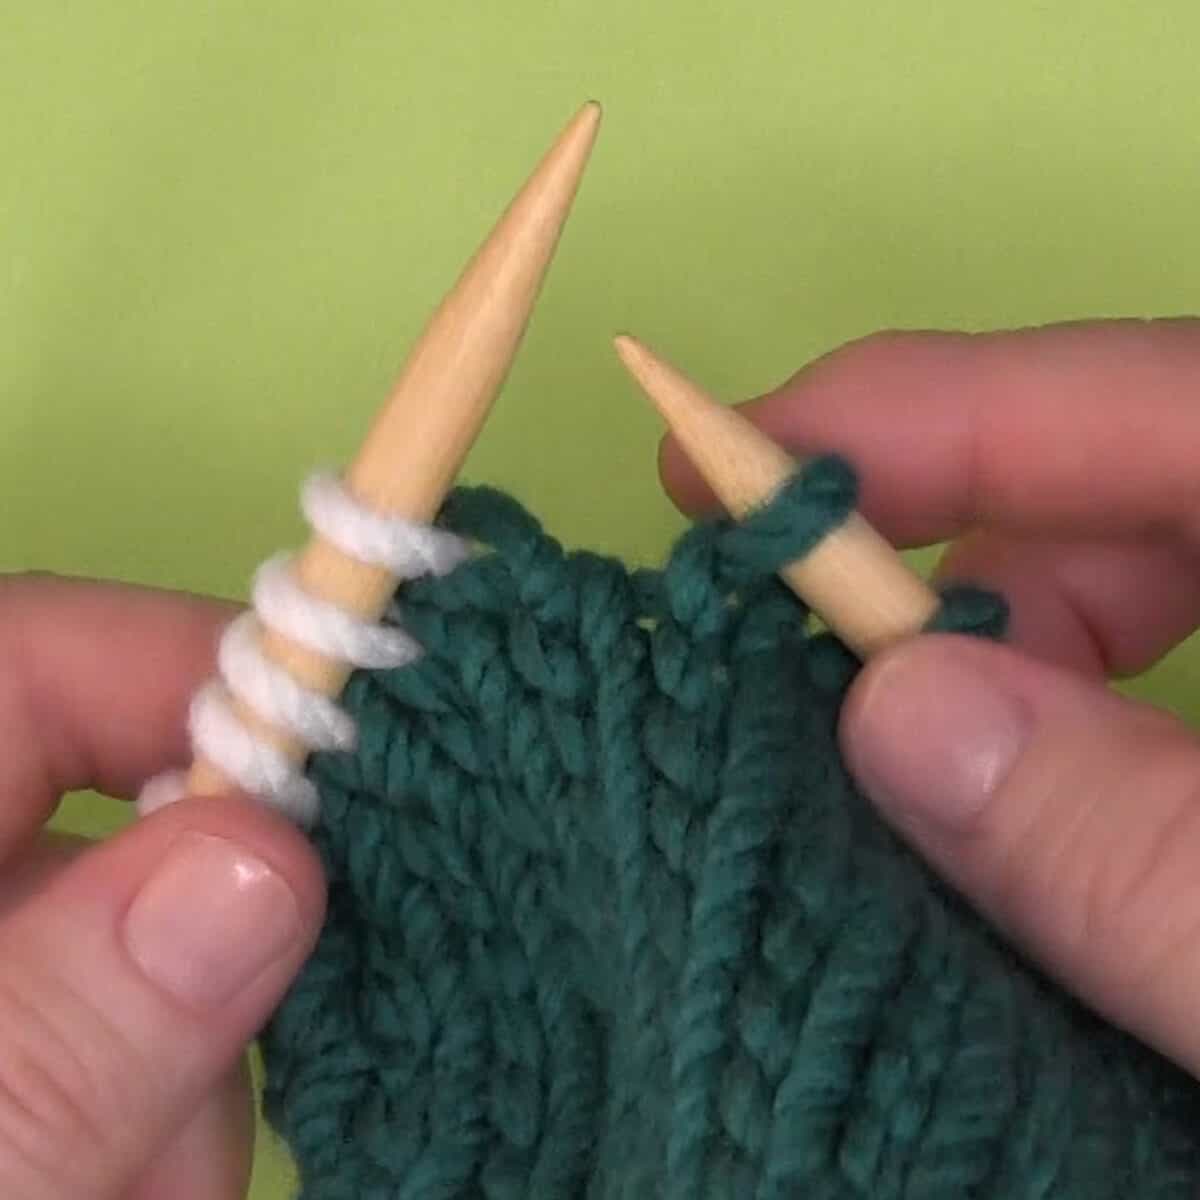 Left-handed demonstration of a finished twisted knit stitch.